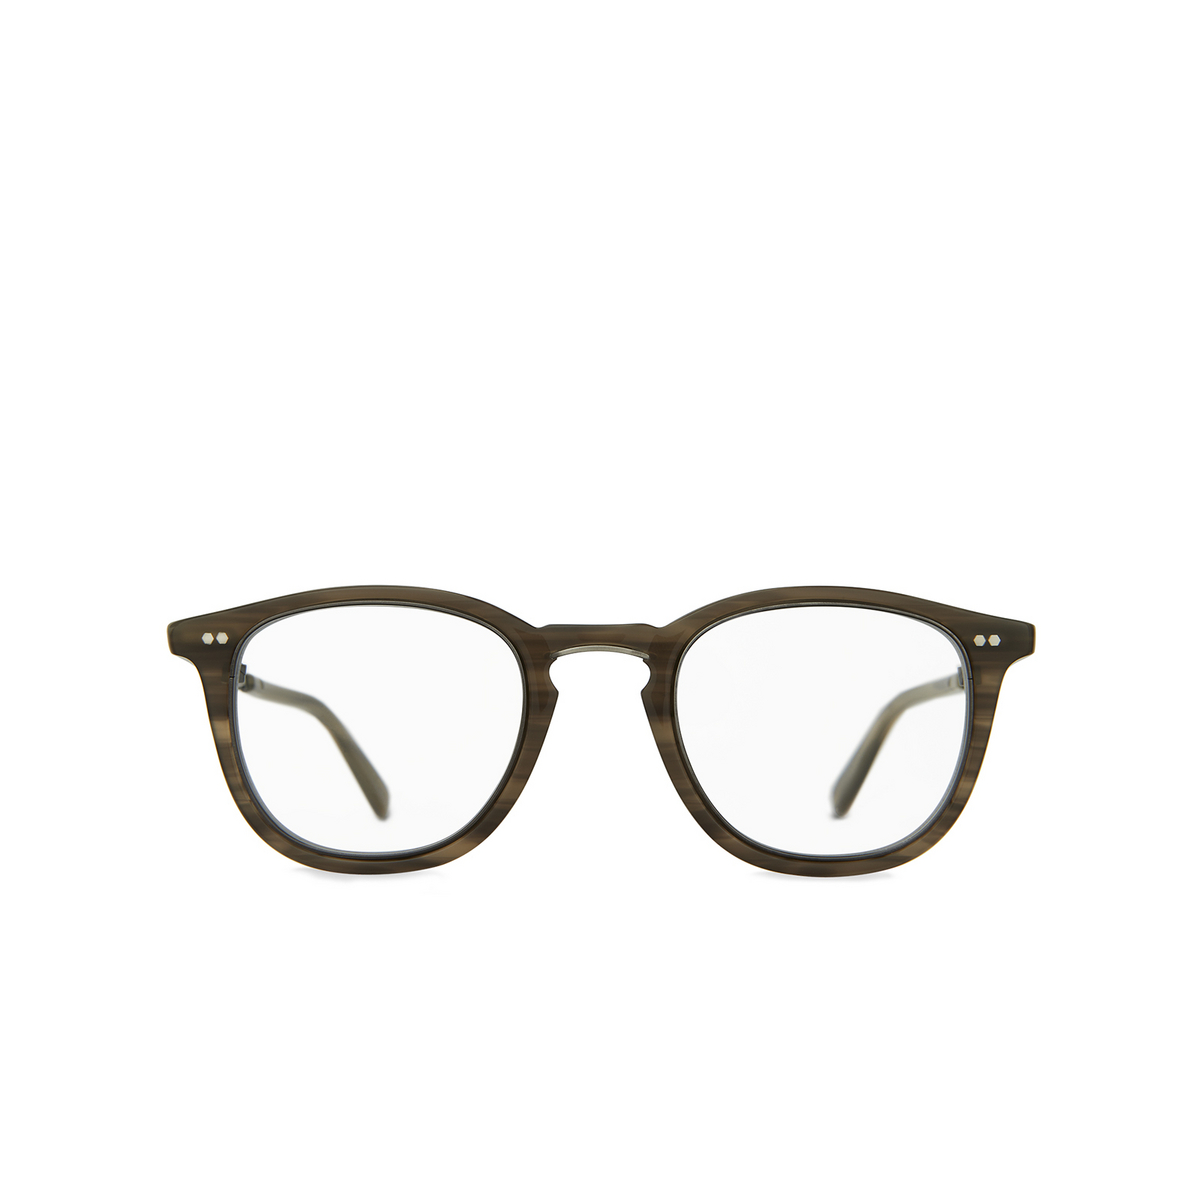 Mr. Leight COOPERS C Eyeglasses GW-PW Greywood - Pewter - front view